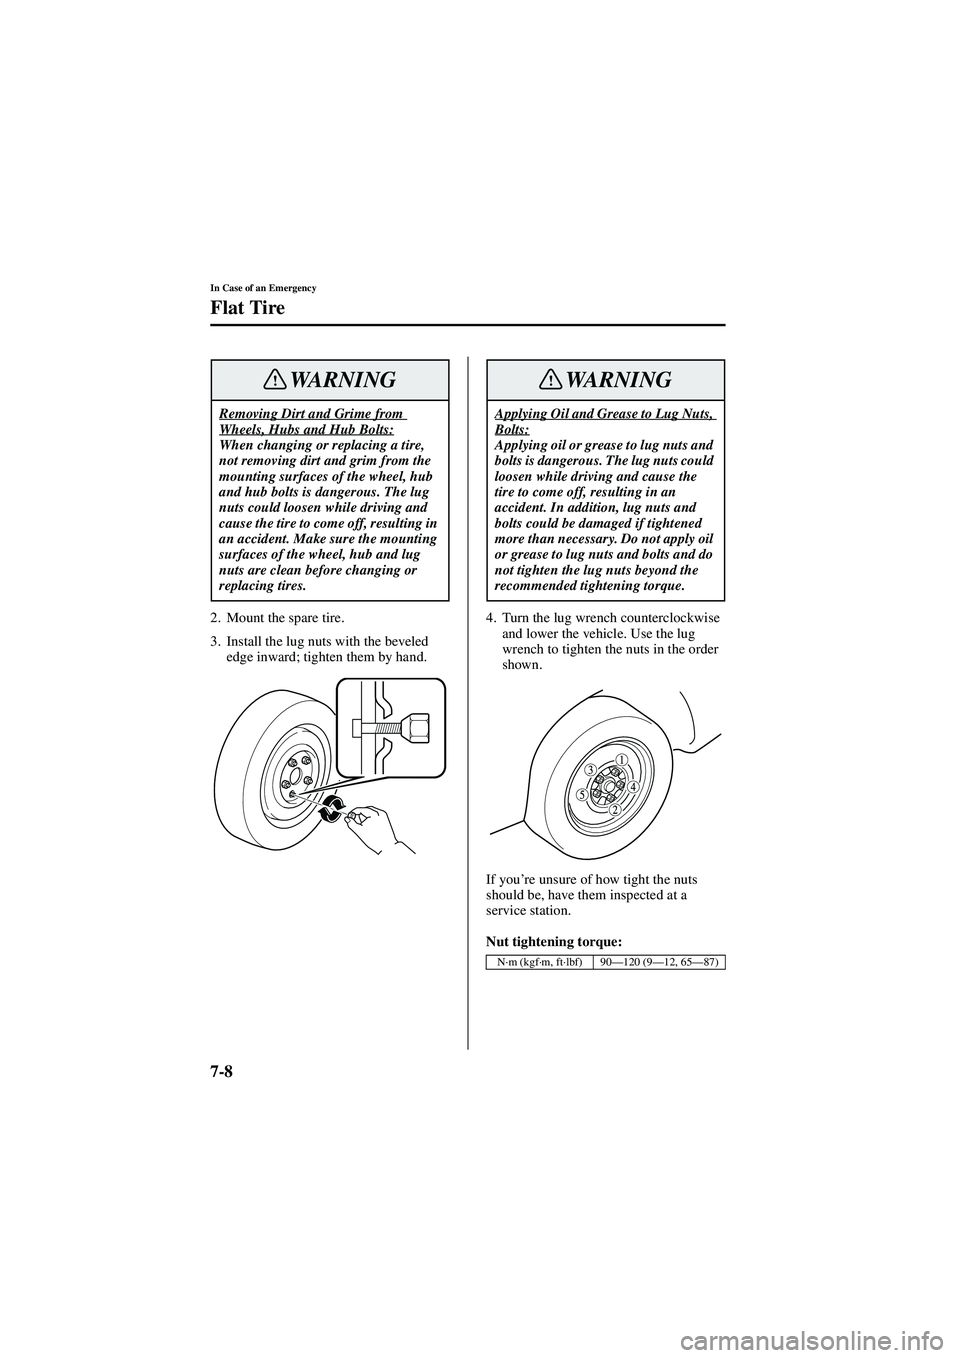 MAZDA MODEL 626 2002  Owners Manual 7-8
In Case of an Emergency
Flat Tire
Form No. 8Q50-EA-01G
2. Mount the spare tire.
3. Install the lug nuts with the beveled edge inward; tighten them by hand. 4. Turn the lug wrench counterclockwise 